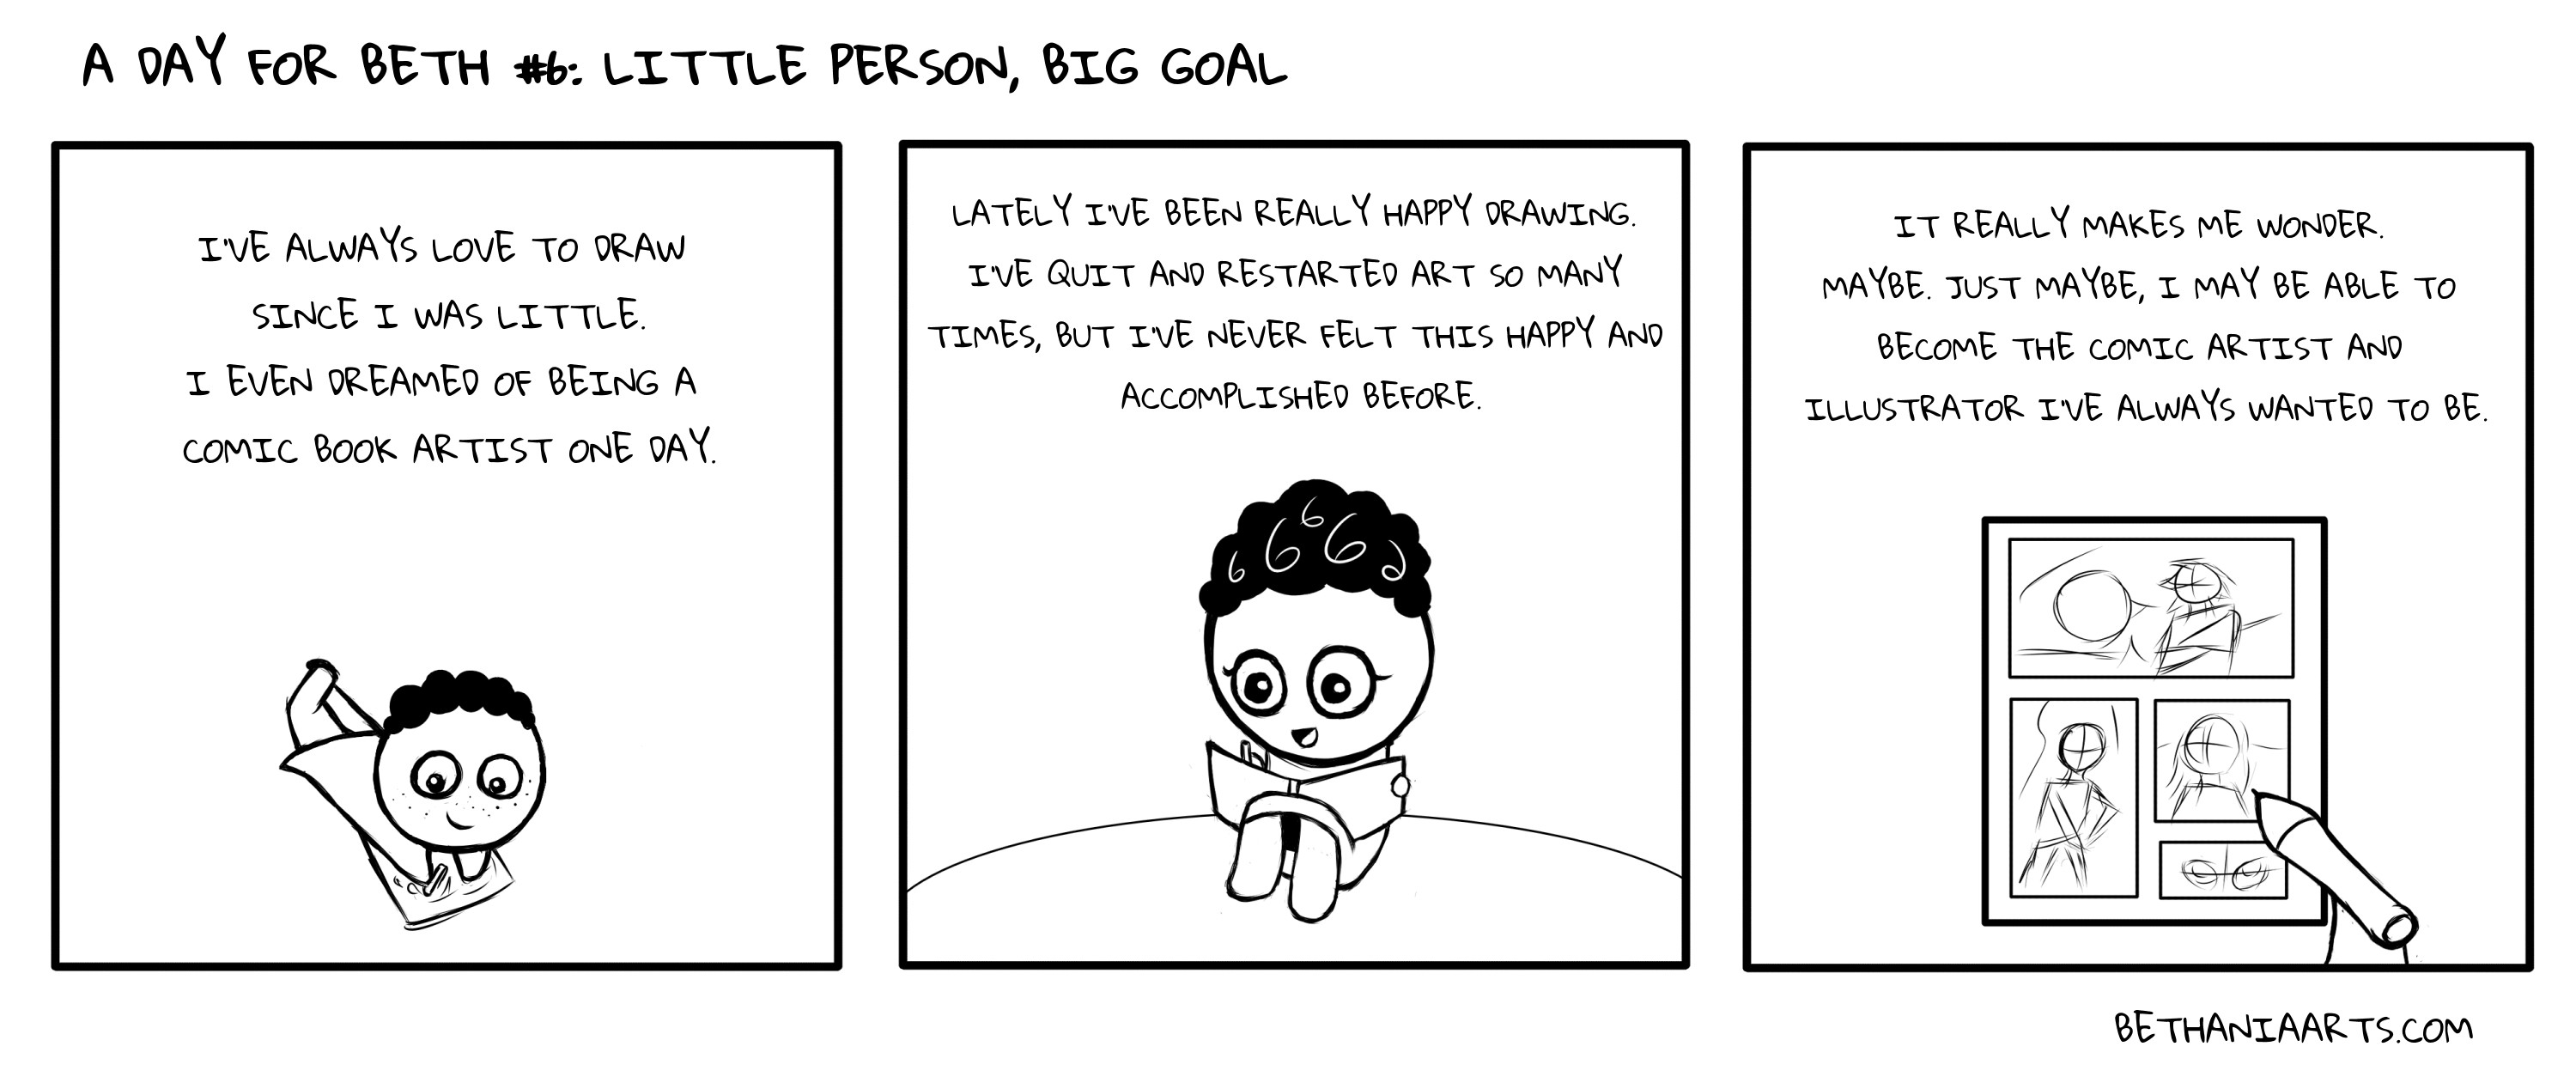 A Day For Beth #6: Little Person, Big Goal.